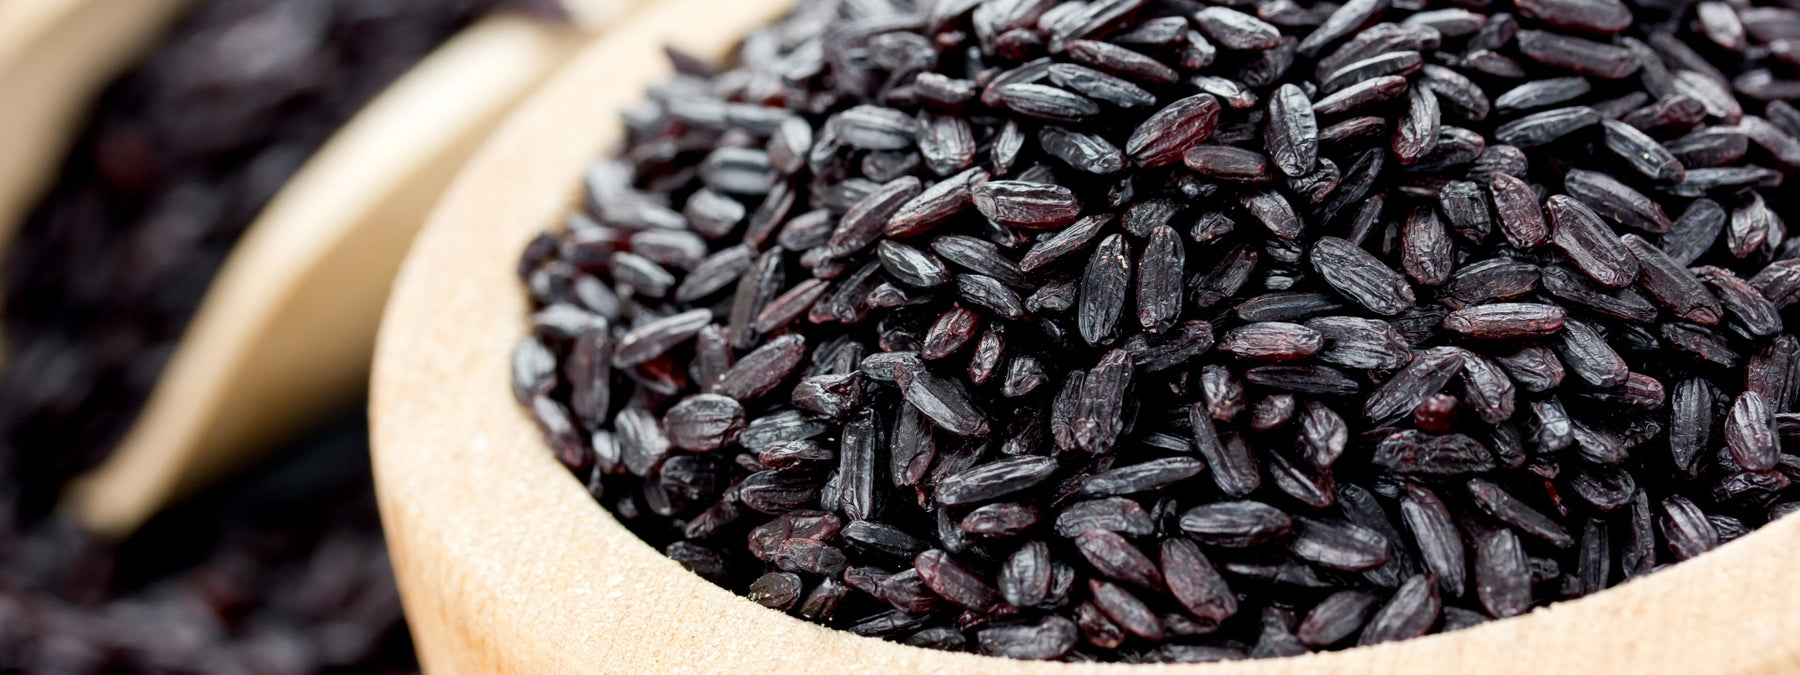 Black Rice: Should You Eat This Superfood?